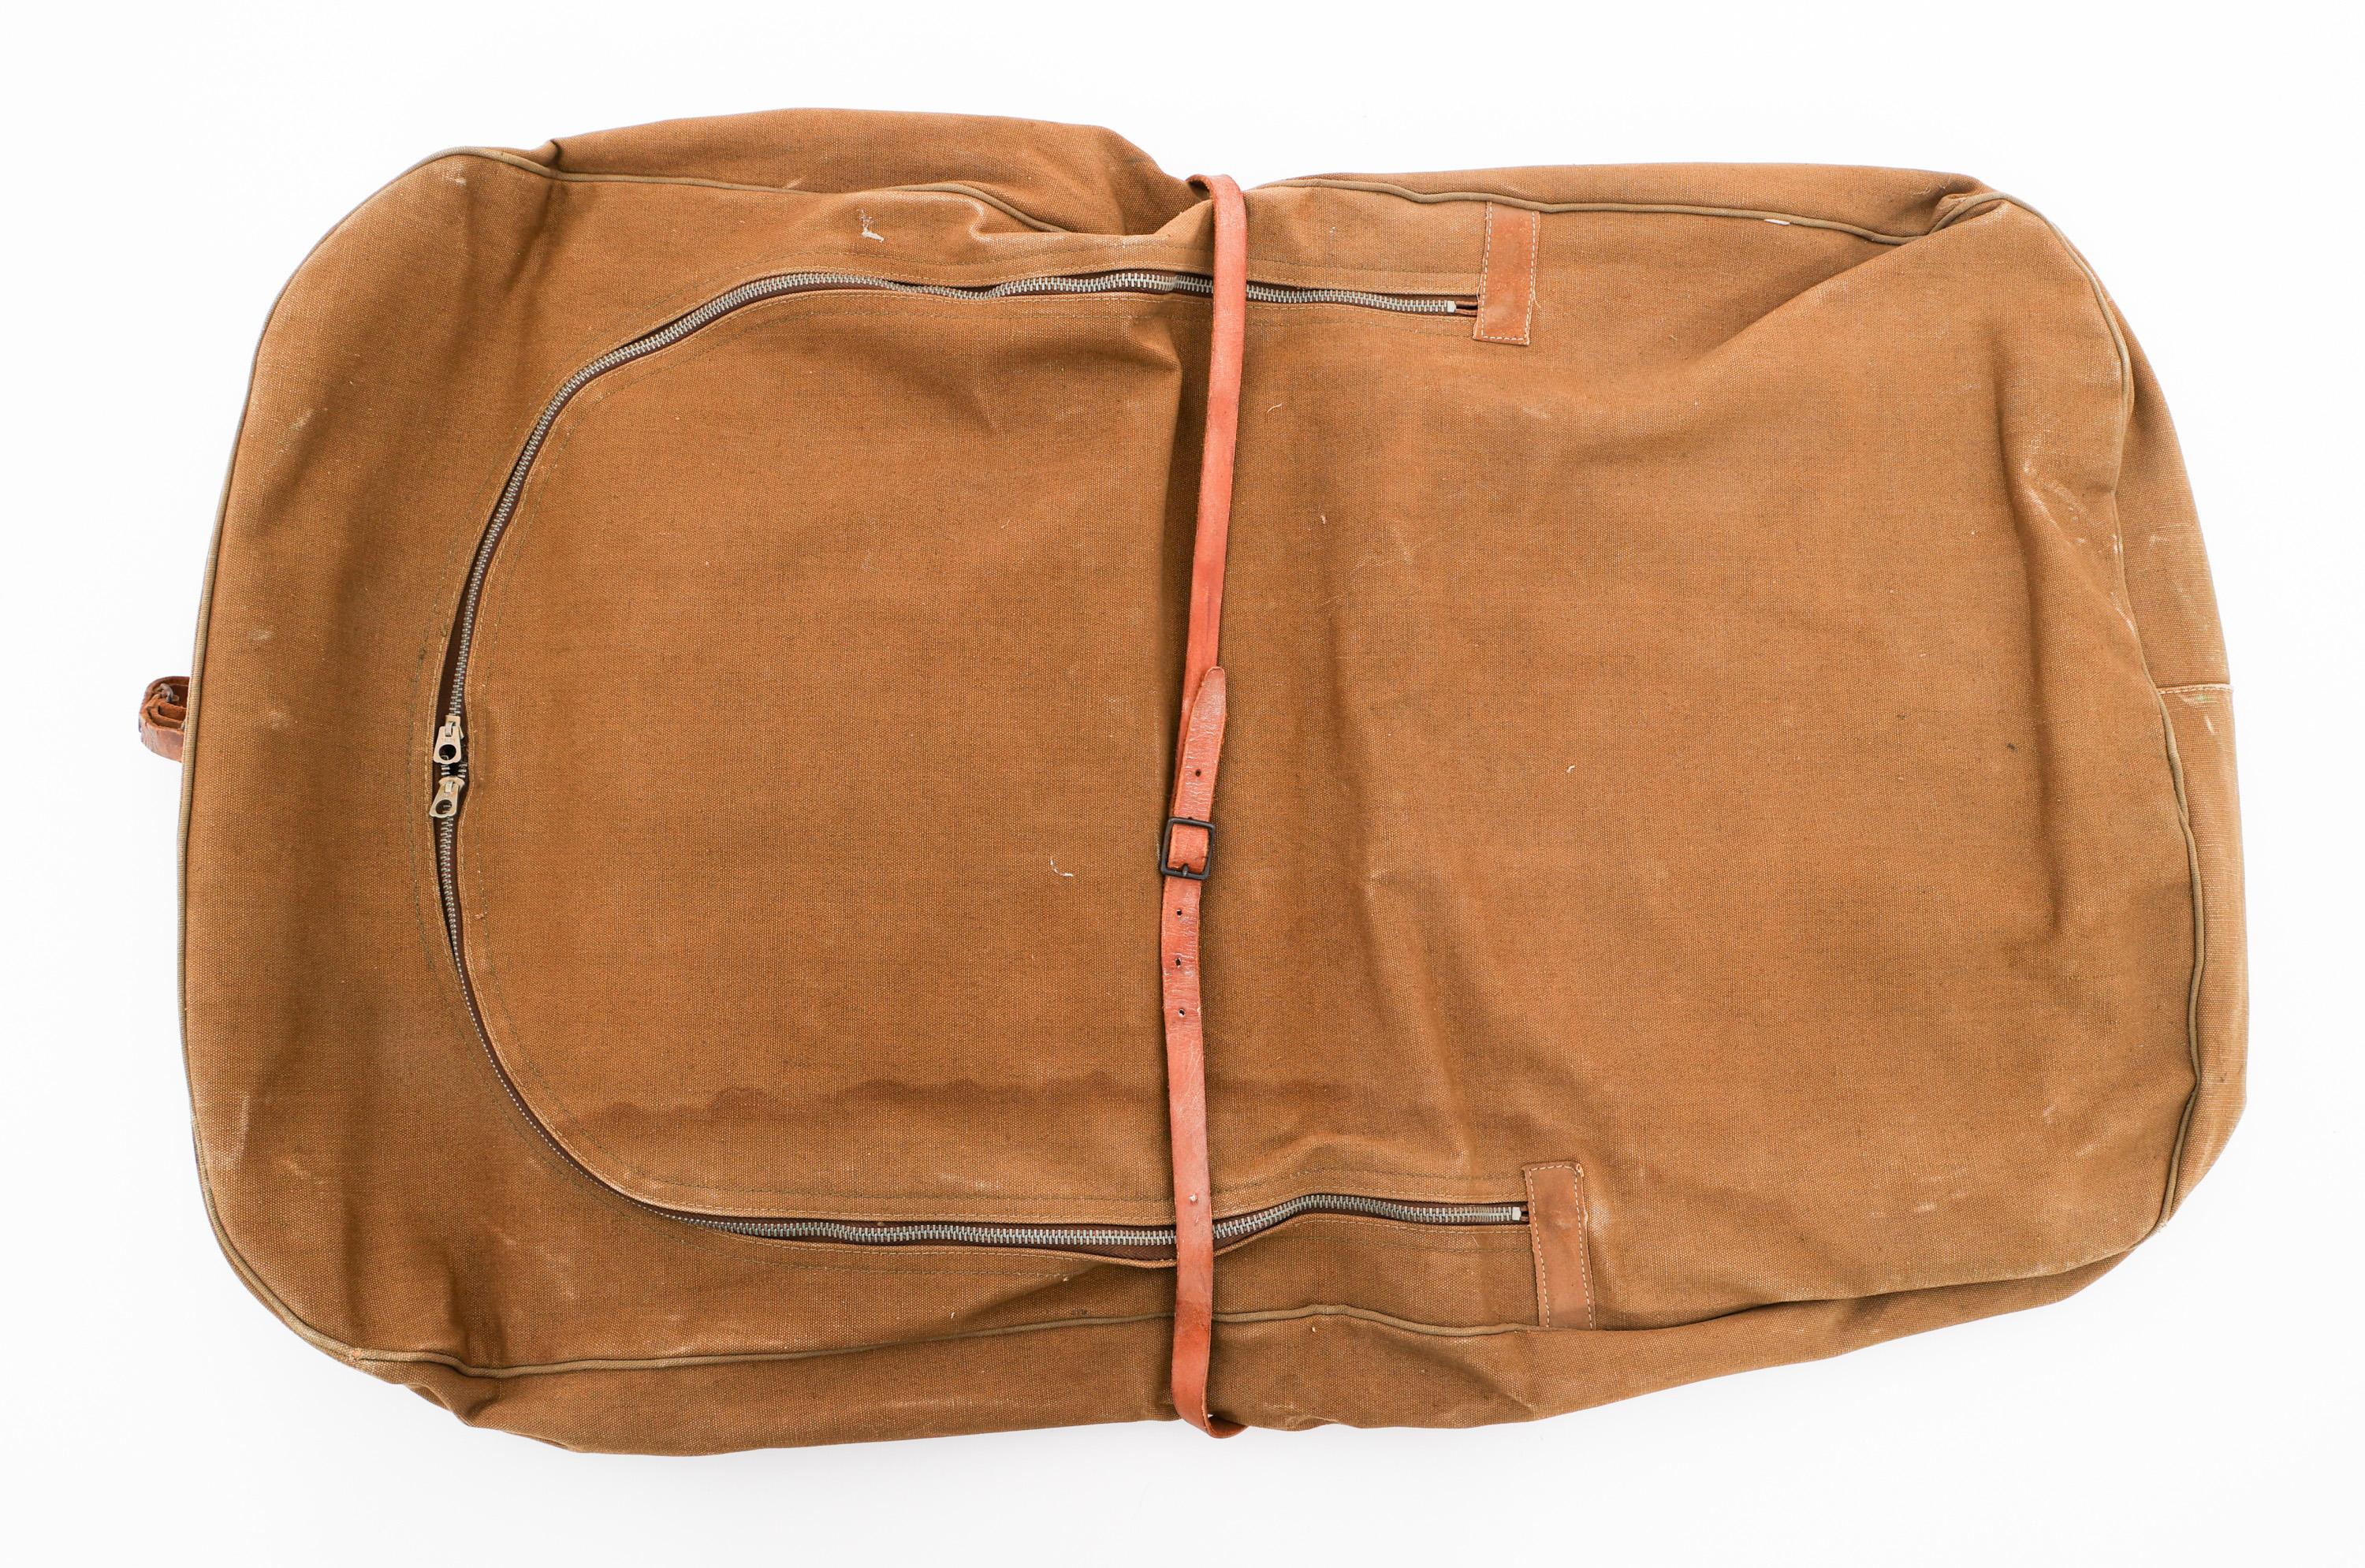 WWII US ARMY NAMED TANK DESTROYER GARMENT BAG